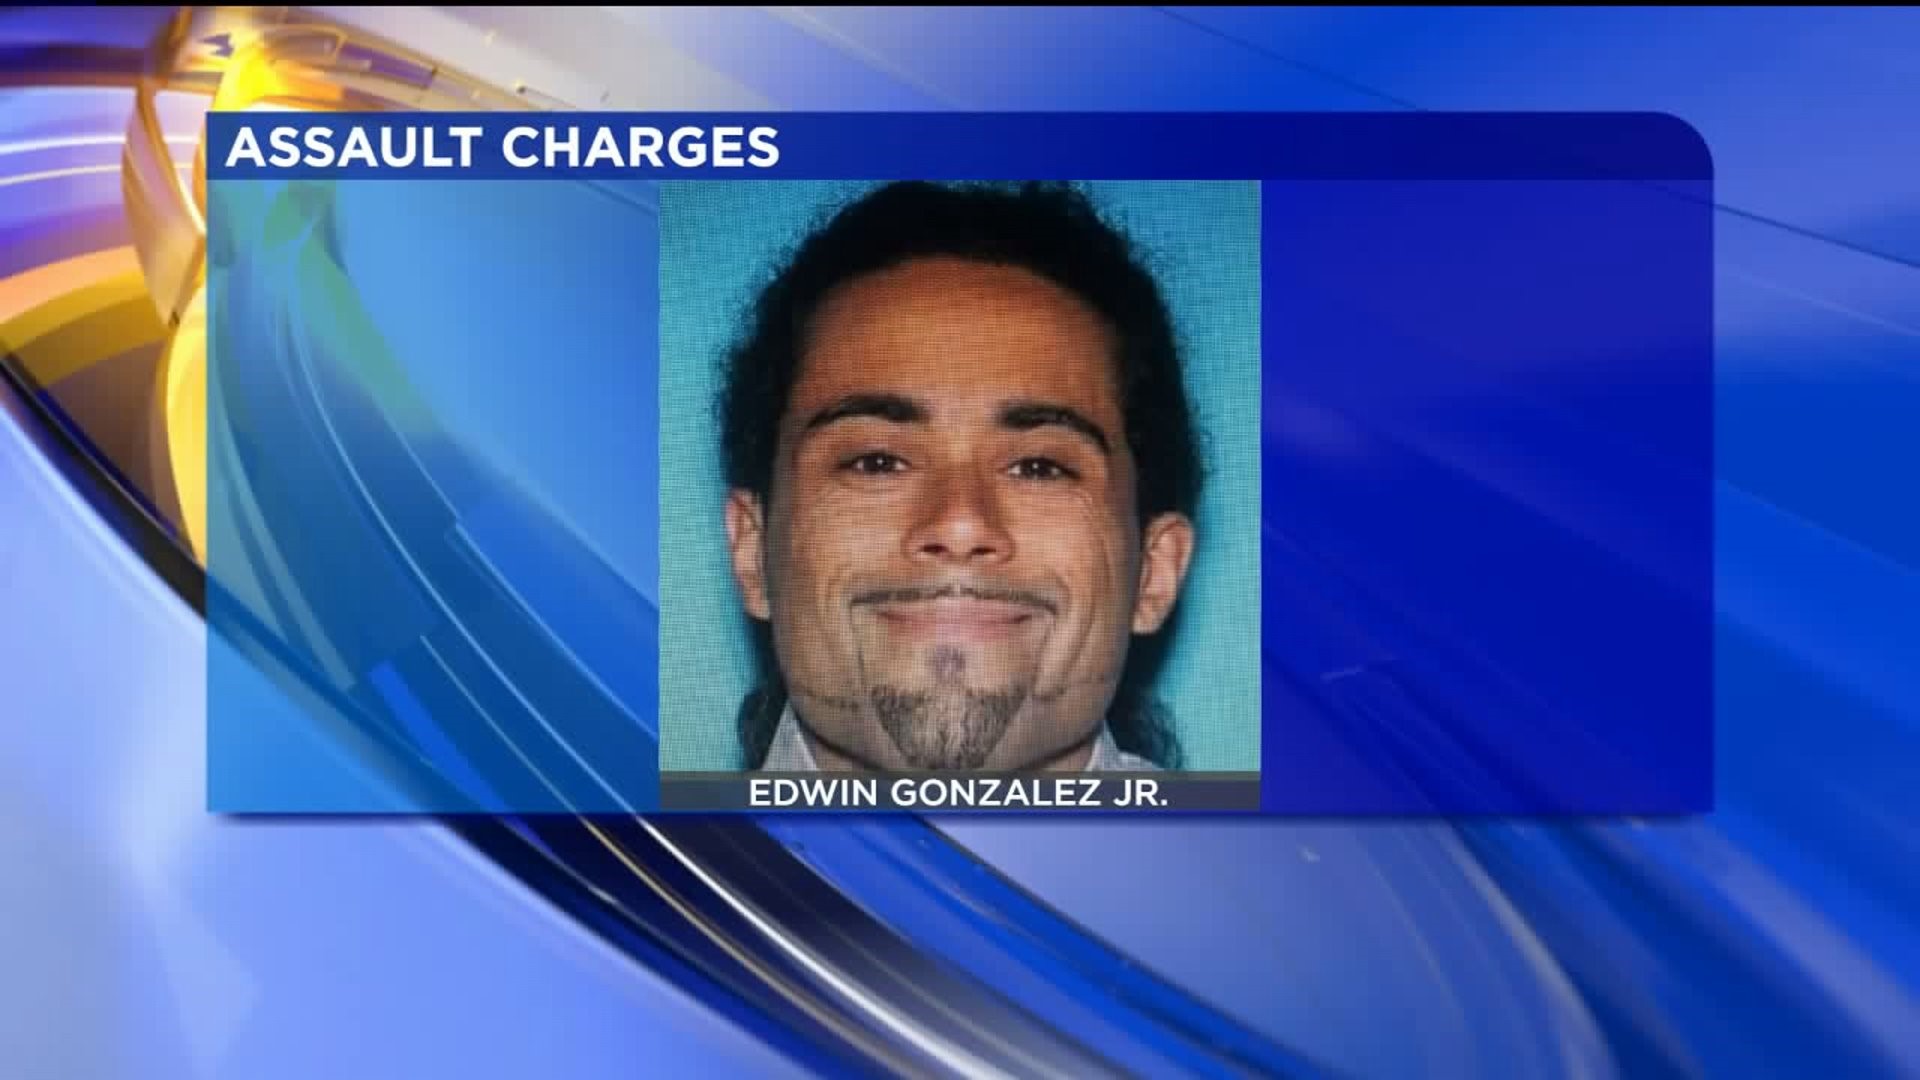 Man Accused of Hitting Woman, Threatening Her and Her Child